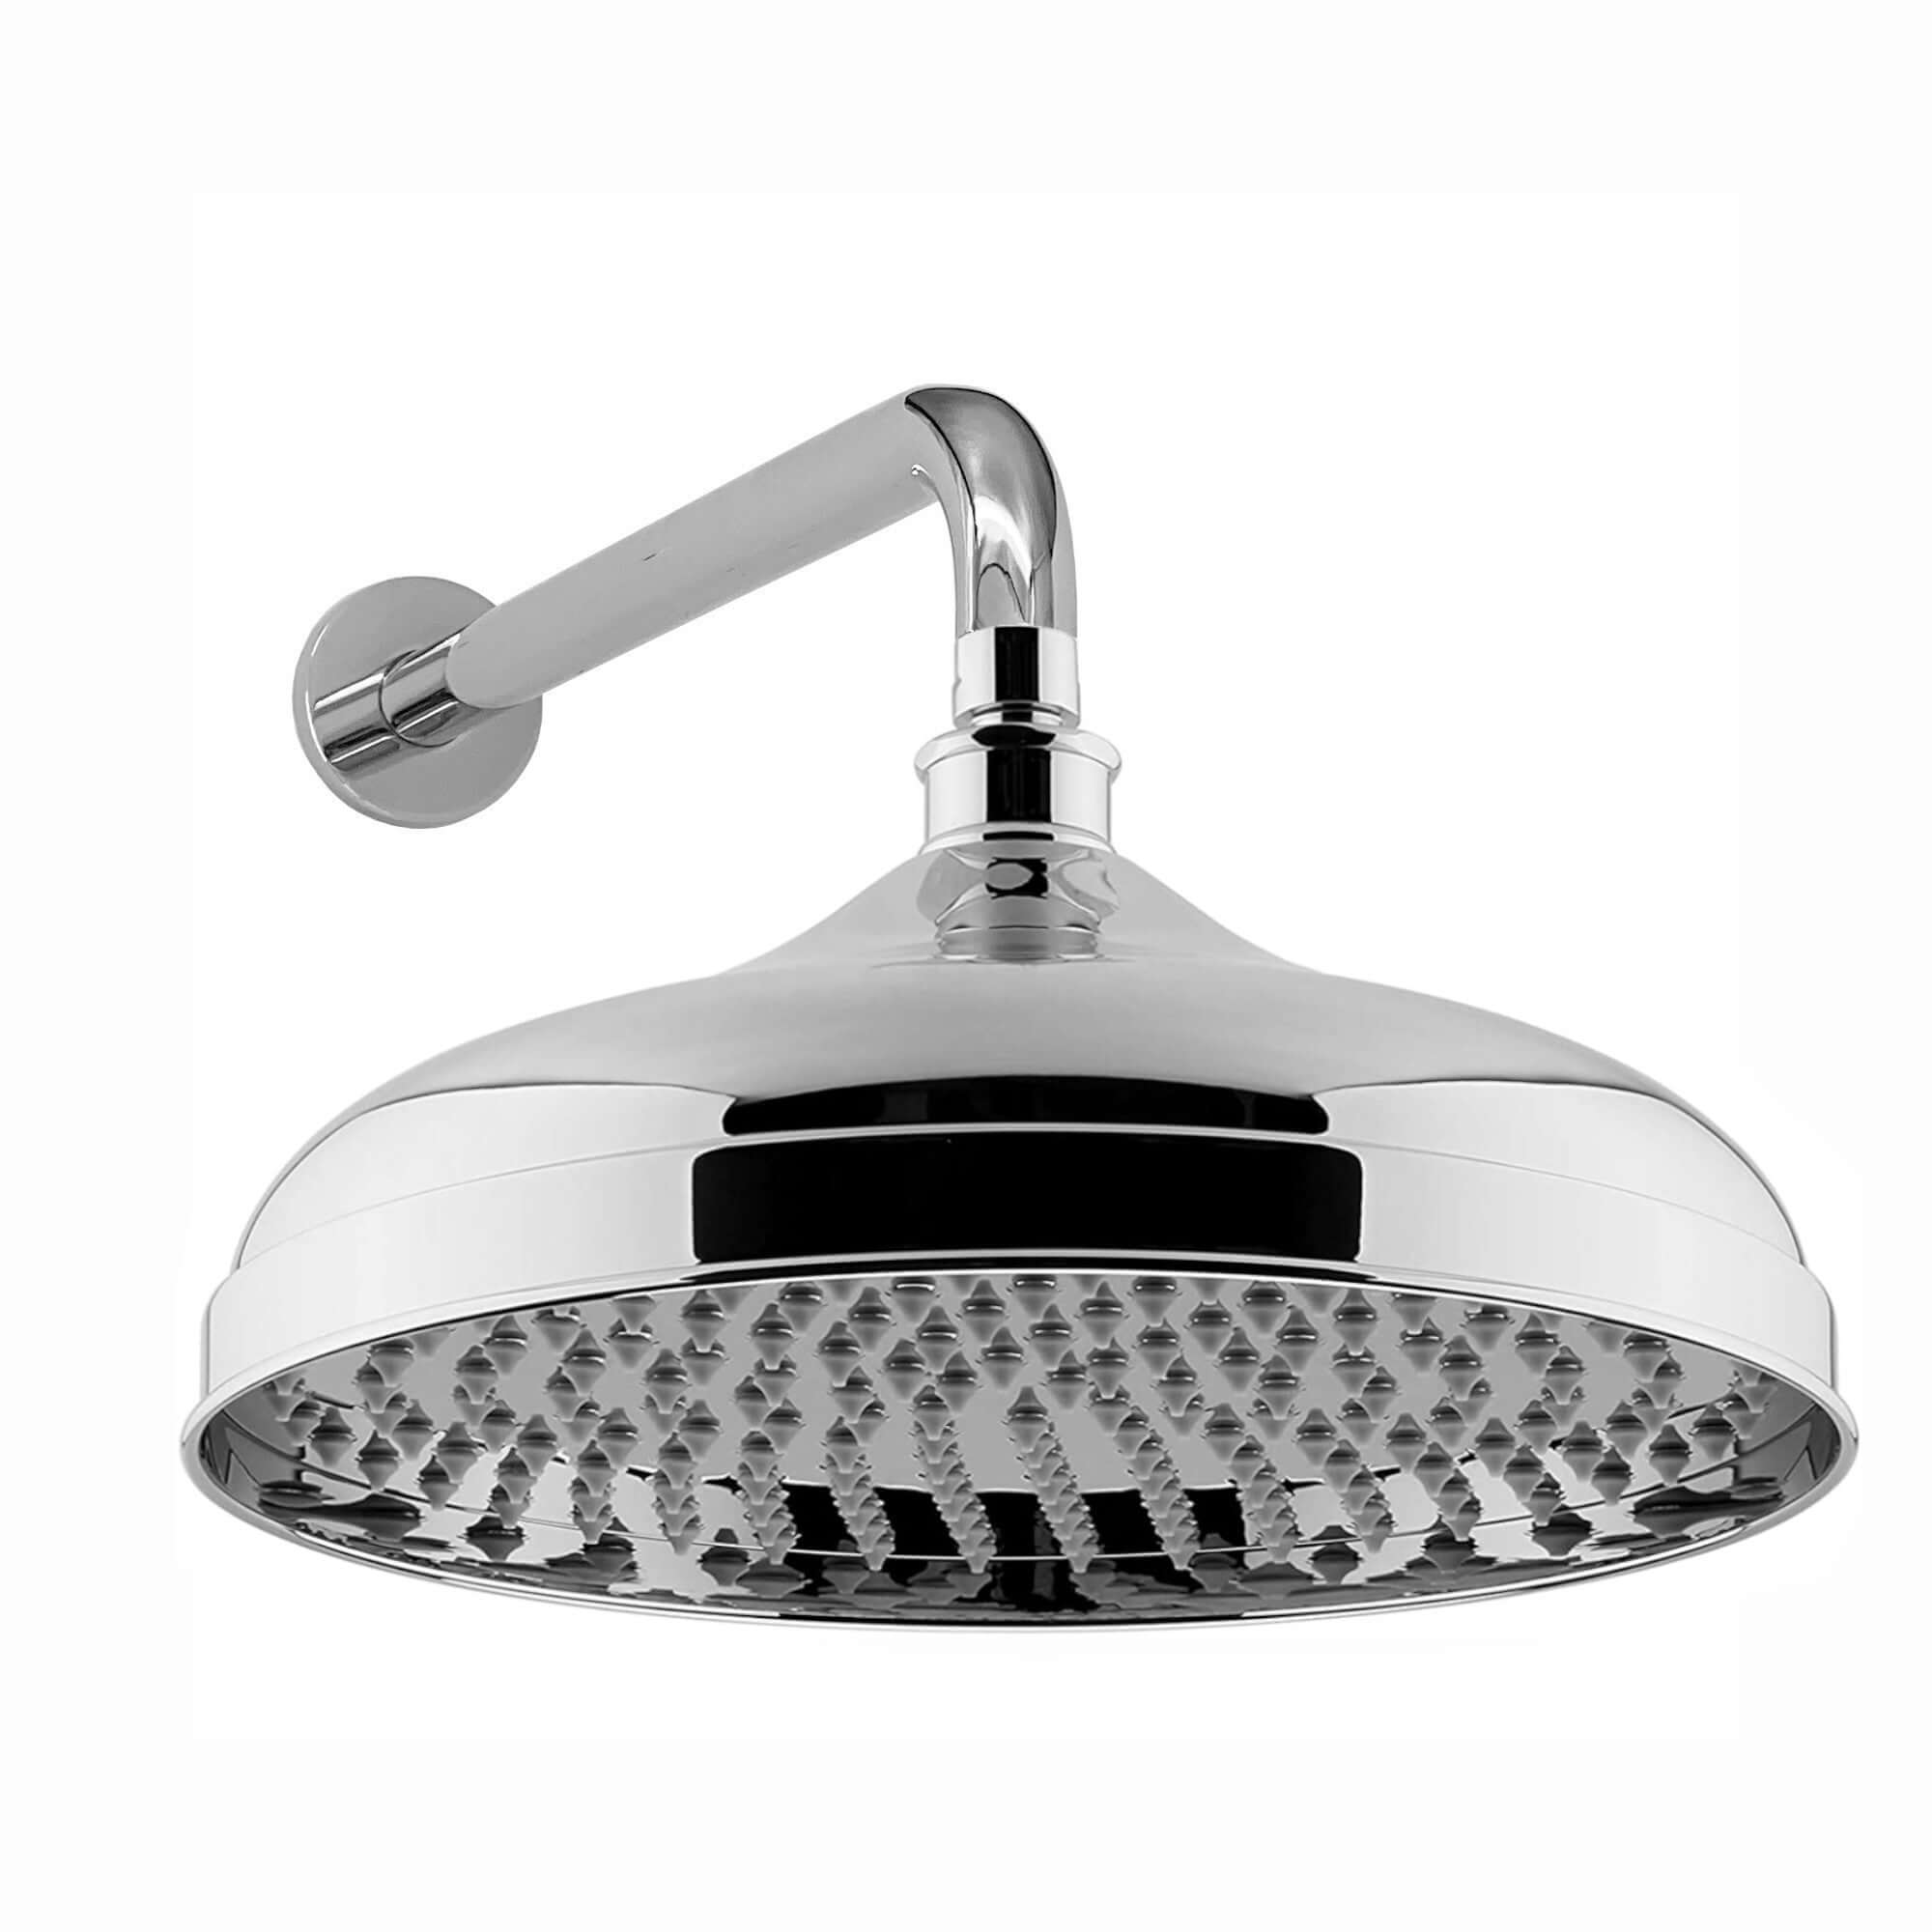 Traditional Wall Fixed Apron Brass Shower Head 12" With Shower Arm - Chrome